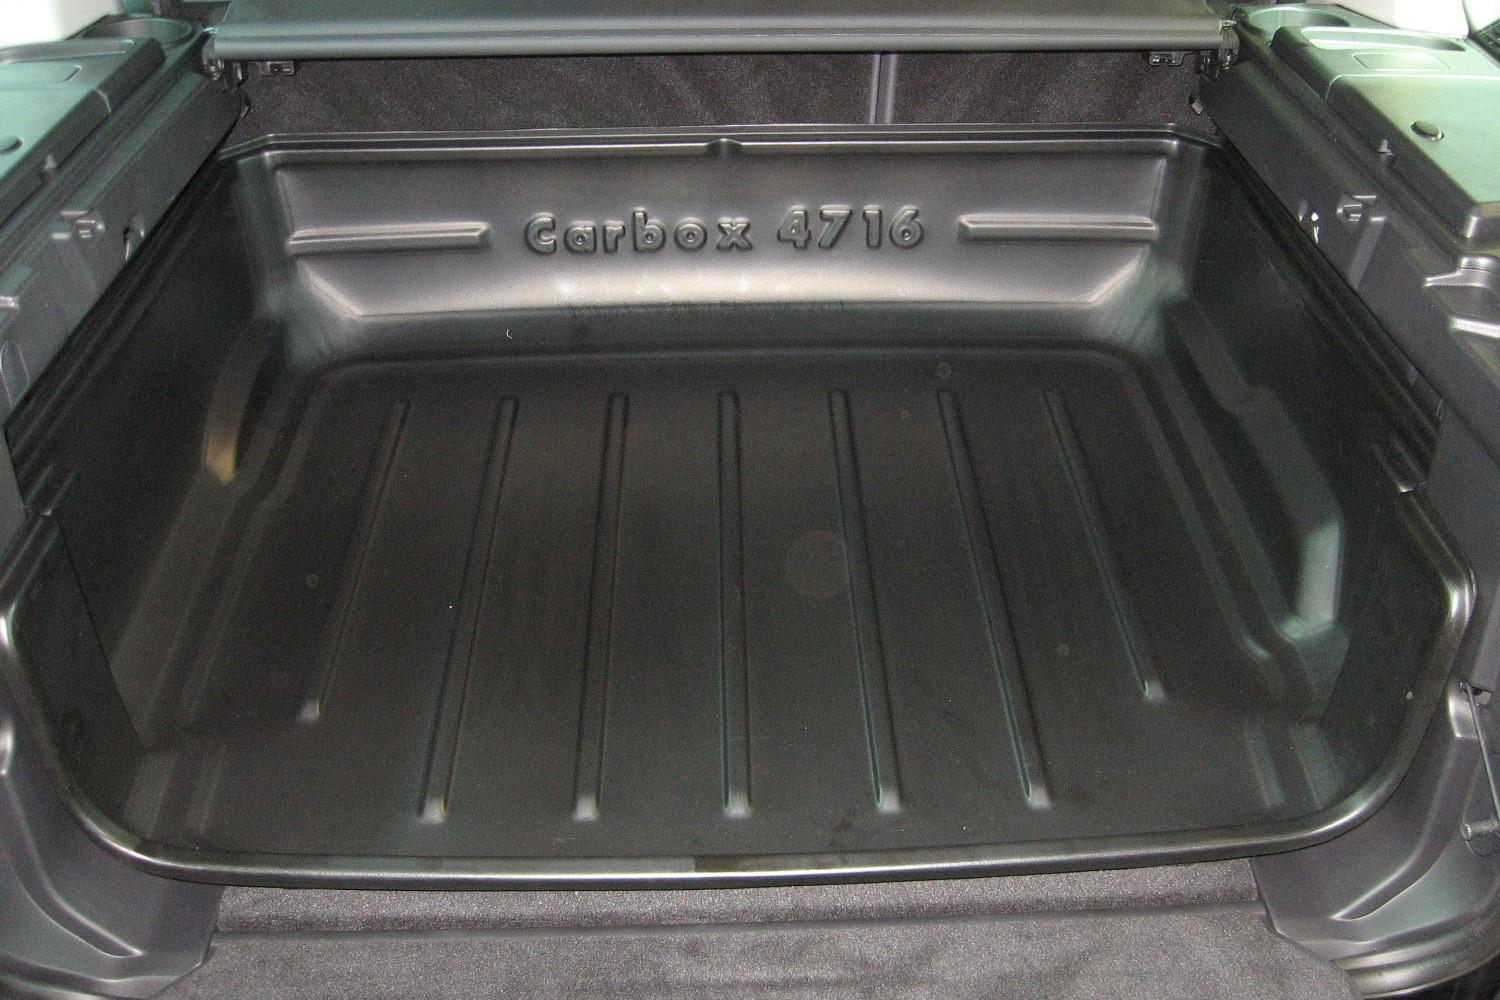 Boot liner suitable for Land Rover Discovery 4 2009-2017 Carbox Classic high wall